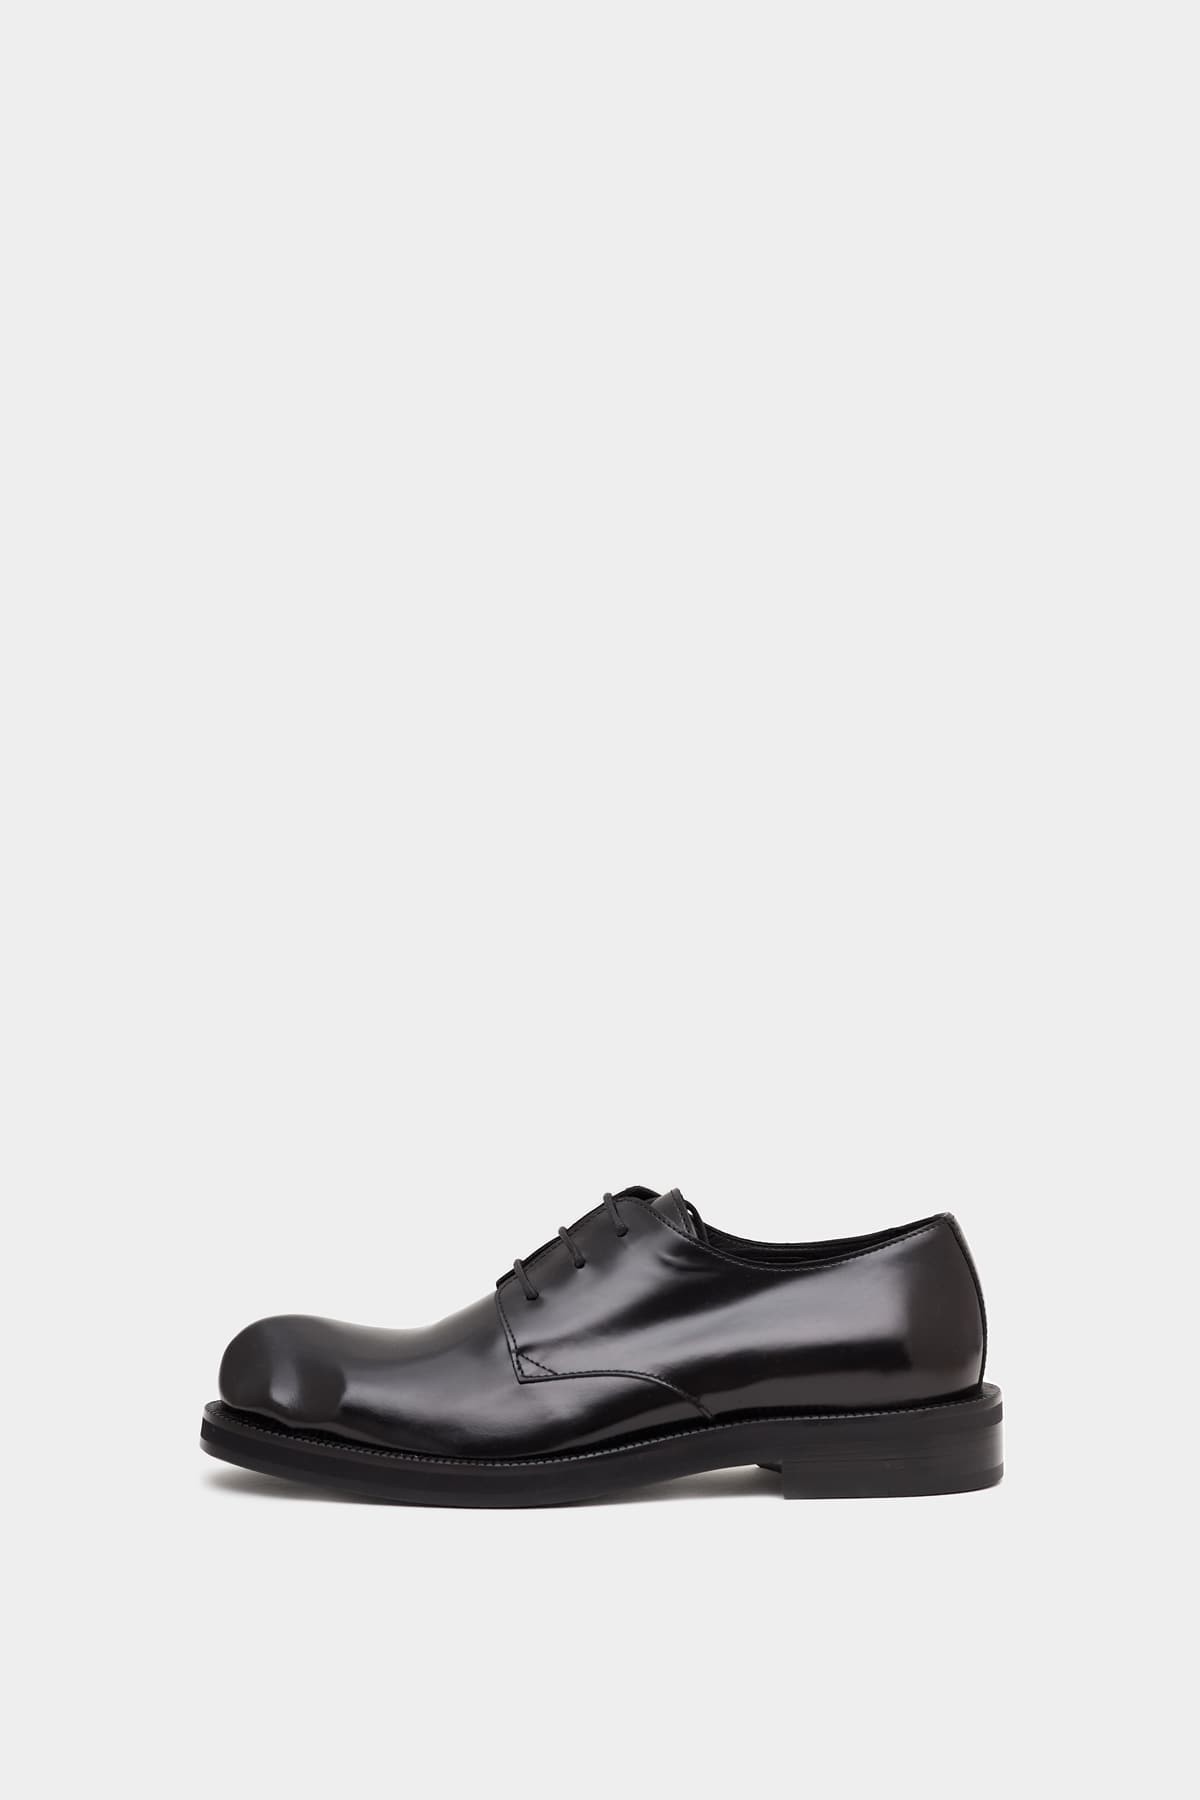 ACNE STUDIOS BLACK LEATHER DERBY SHOES | IAMNUE